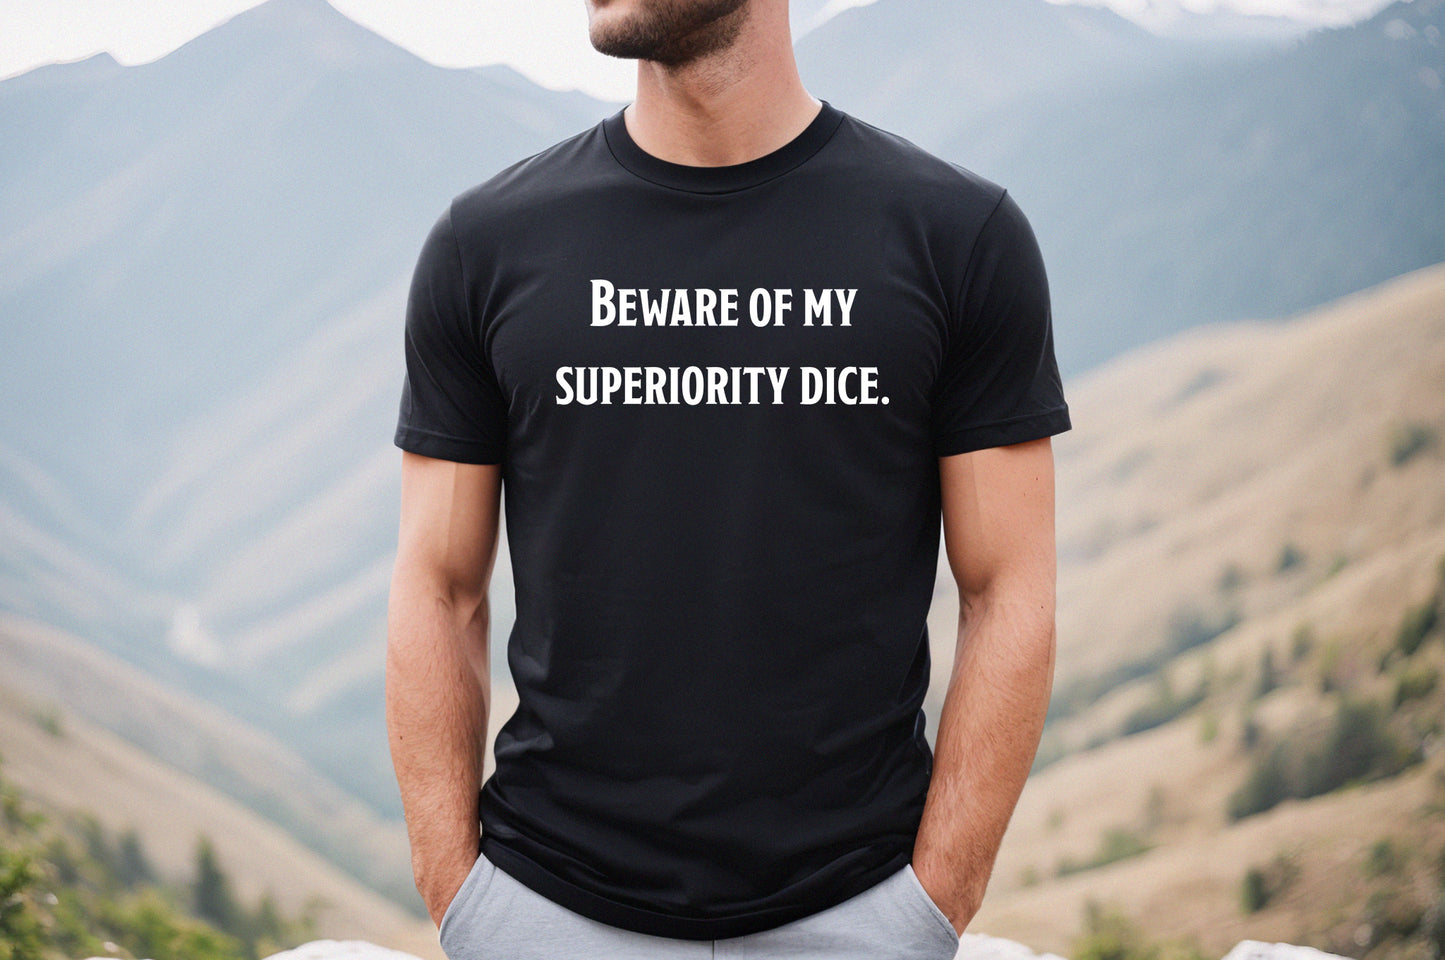 Beware of My Superiority Dice DnD Shirt, Dungeon Master Gift, Pathfinder Tee, D&D Tabletop Gaming Cotton TShirt, Unisex RPG Top